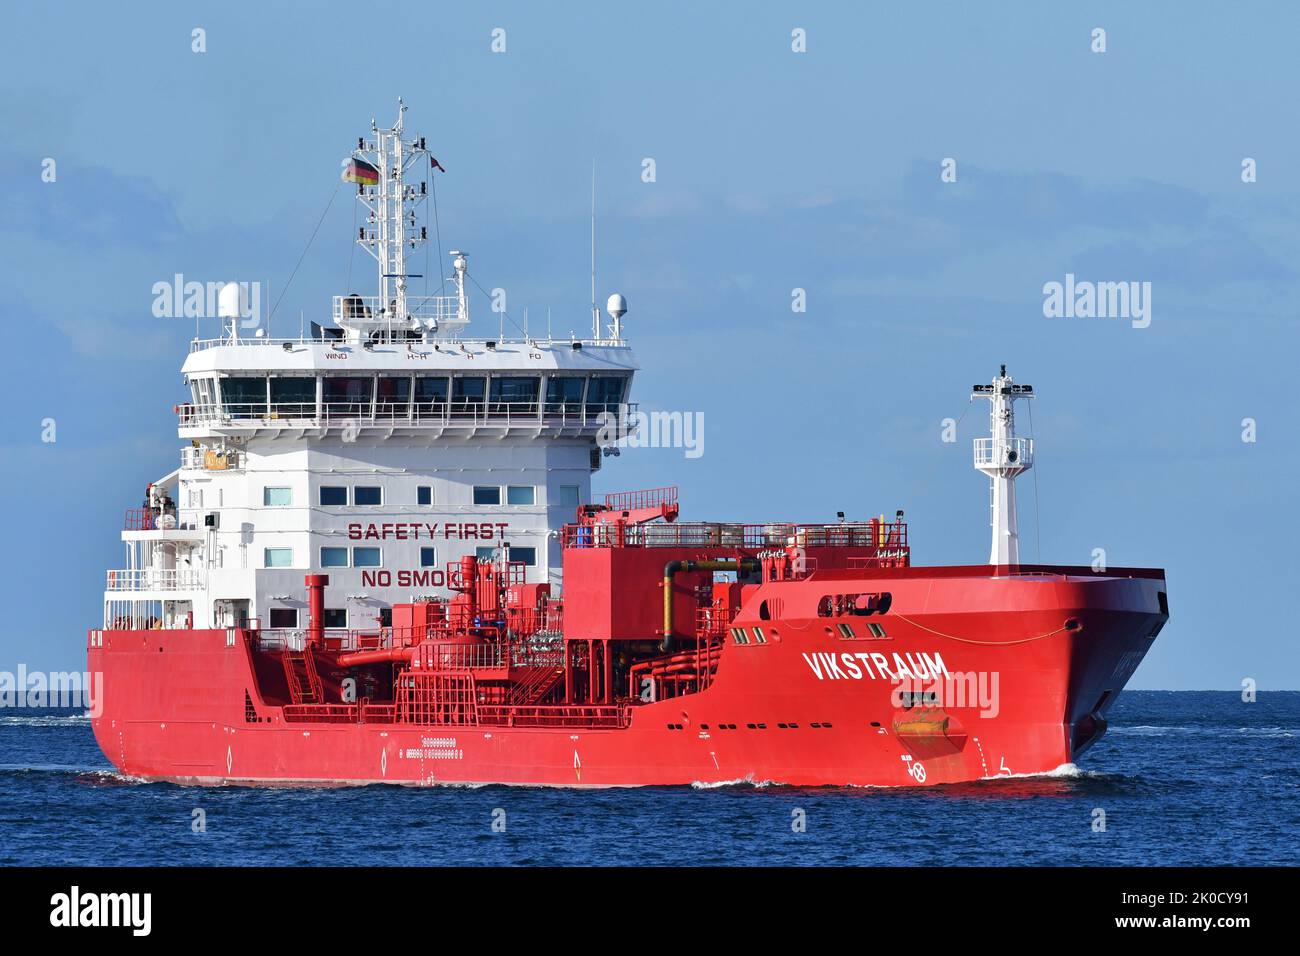 Chemical/Oil Products Tanker VIKSTRAUM Stock Photo